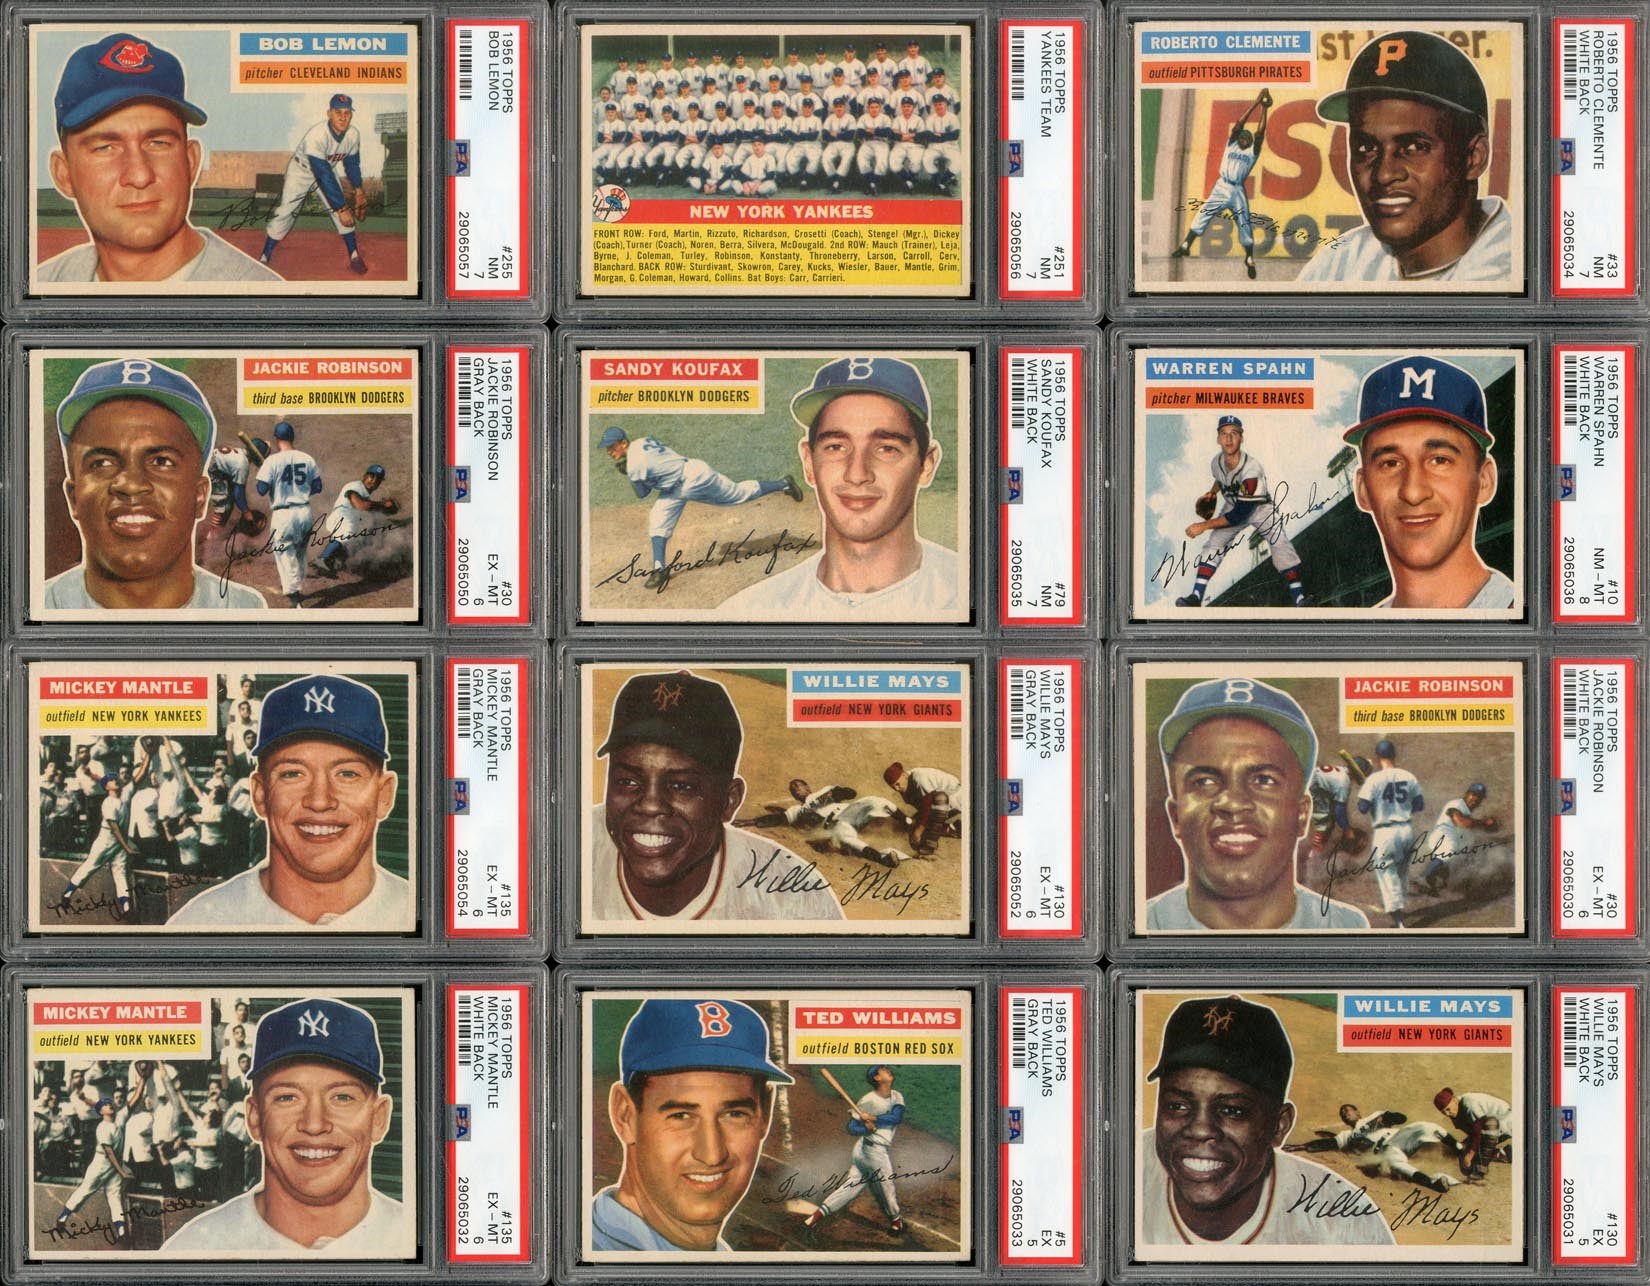 Baseball and Trading Cards - 1956 Topps Complete Master Set of 534 Cards with ALL White/Gray Back Variations (16 PSA Graded)